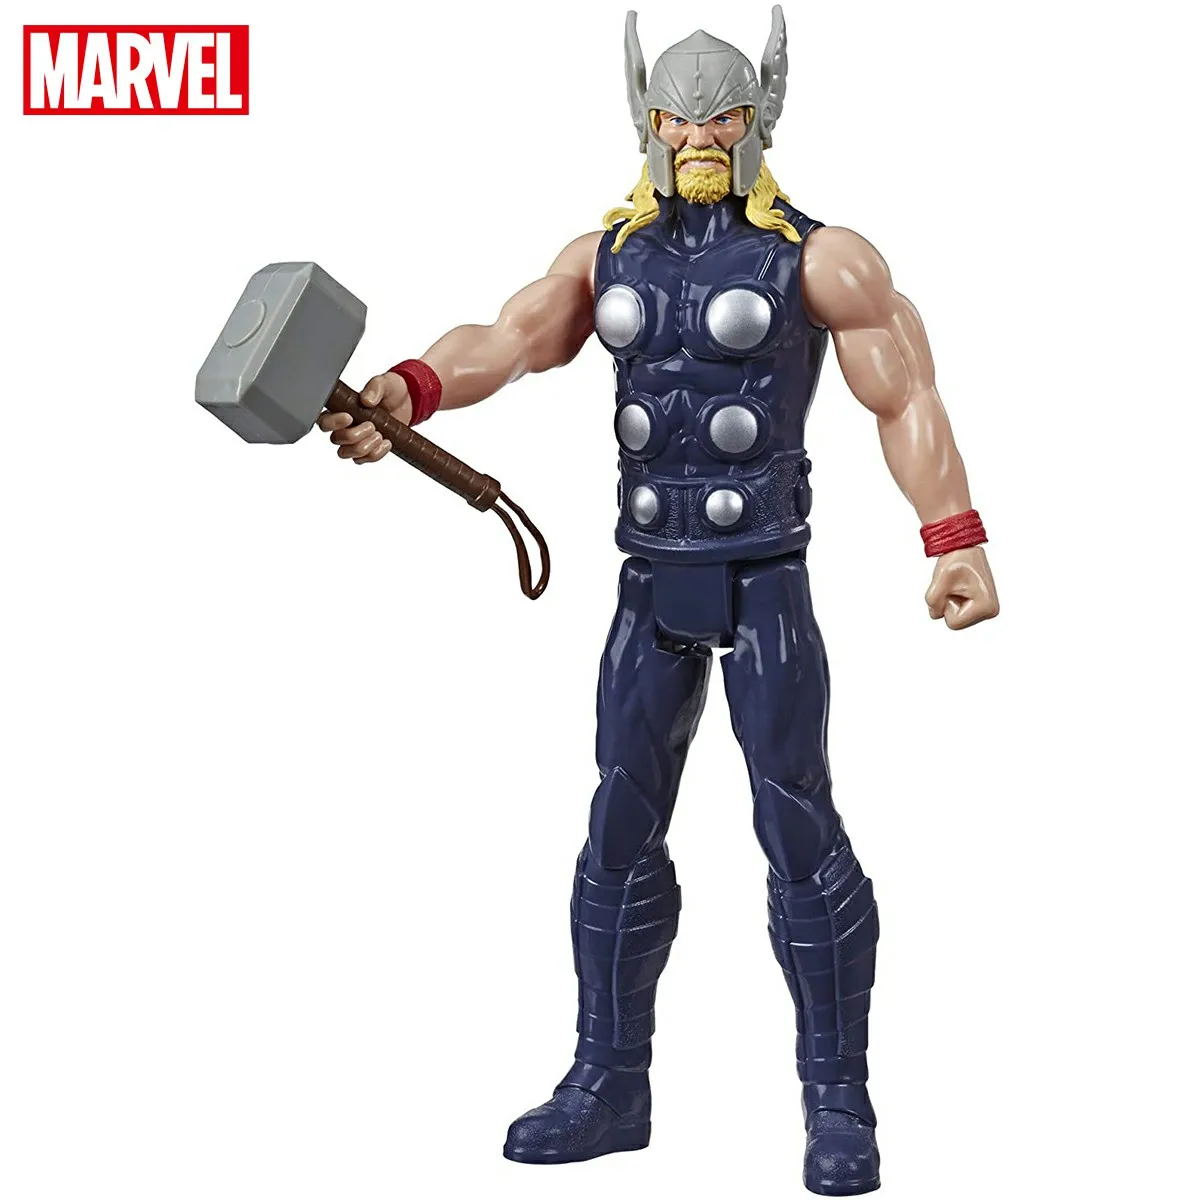 

Avengers Marvel Blast Gear Thor Cartoon Character 12-inch Movable Doll Superheroes Figure Toy for Children Birthday Gift E3308